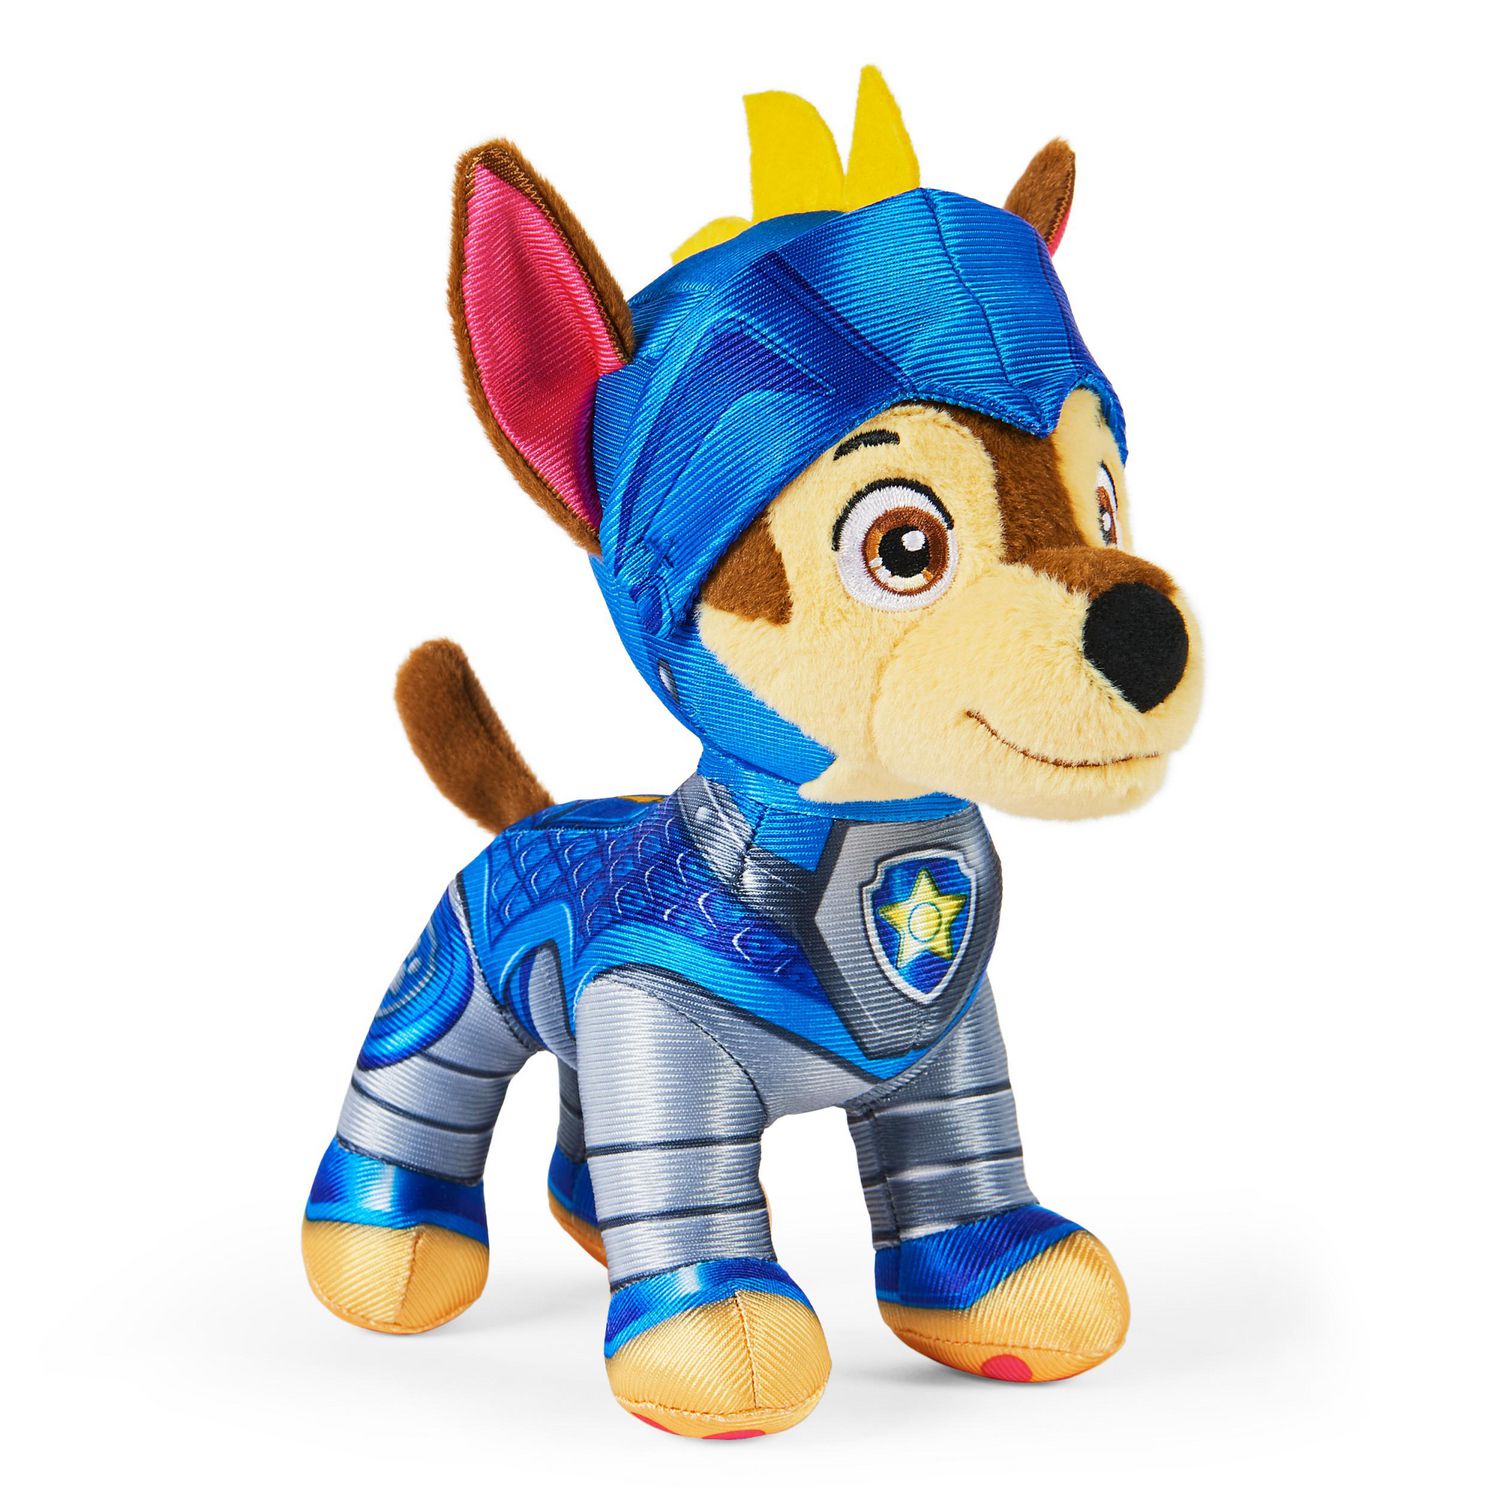 PAW Patrol, Rescue Knights Chase Stuffed Animal Plush Toy, 8-inch, Kids Toys  for Ages 3 and up | Walmart Canada